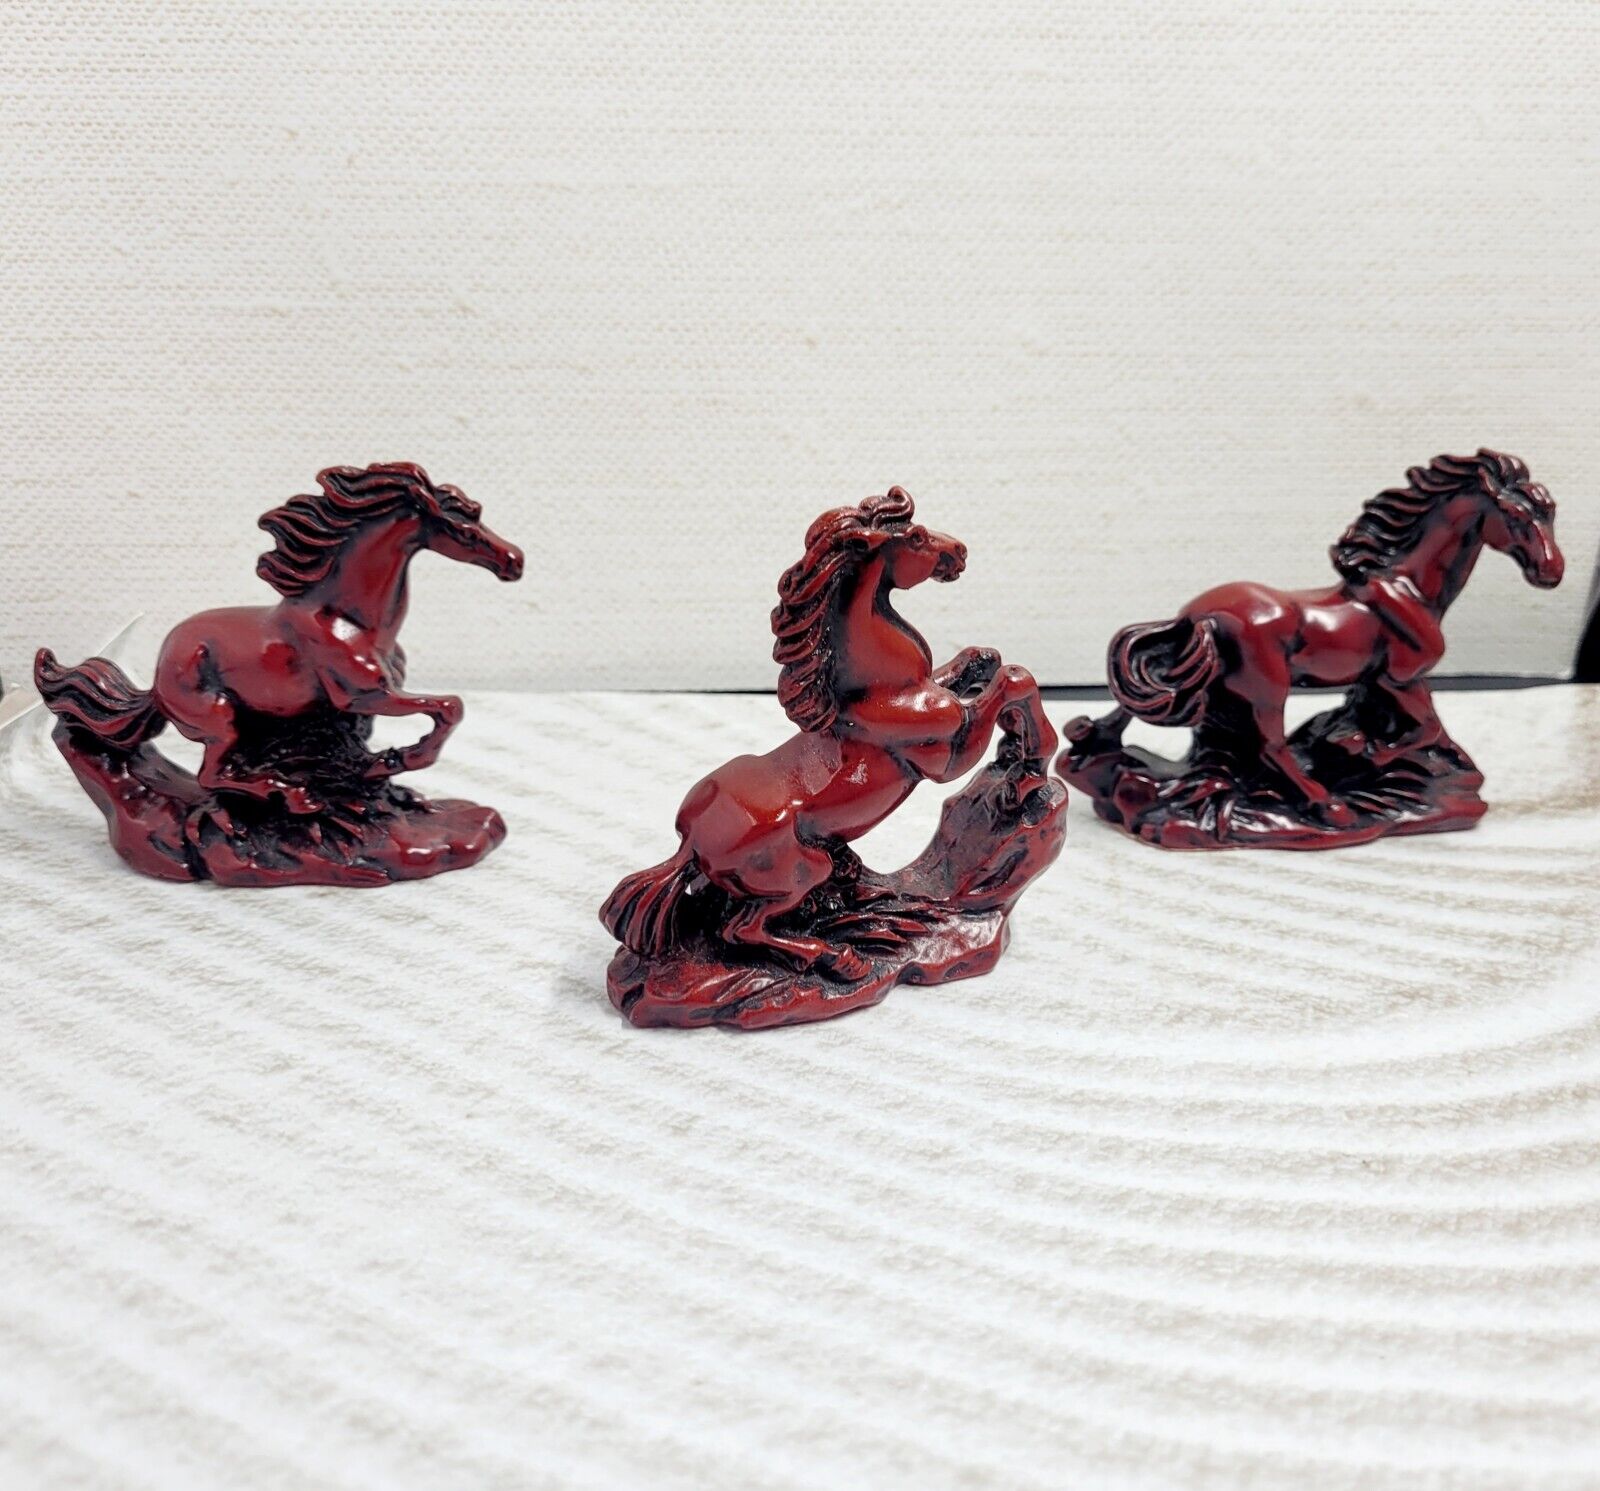 Vtg Chinese Wild Horse Sculpture Red Resin Figure Asian Sculpture ~Set of 3~